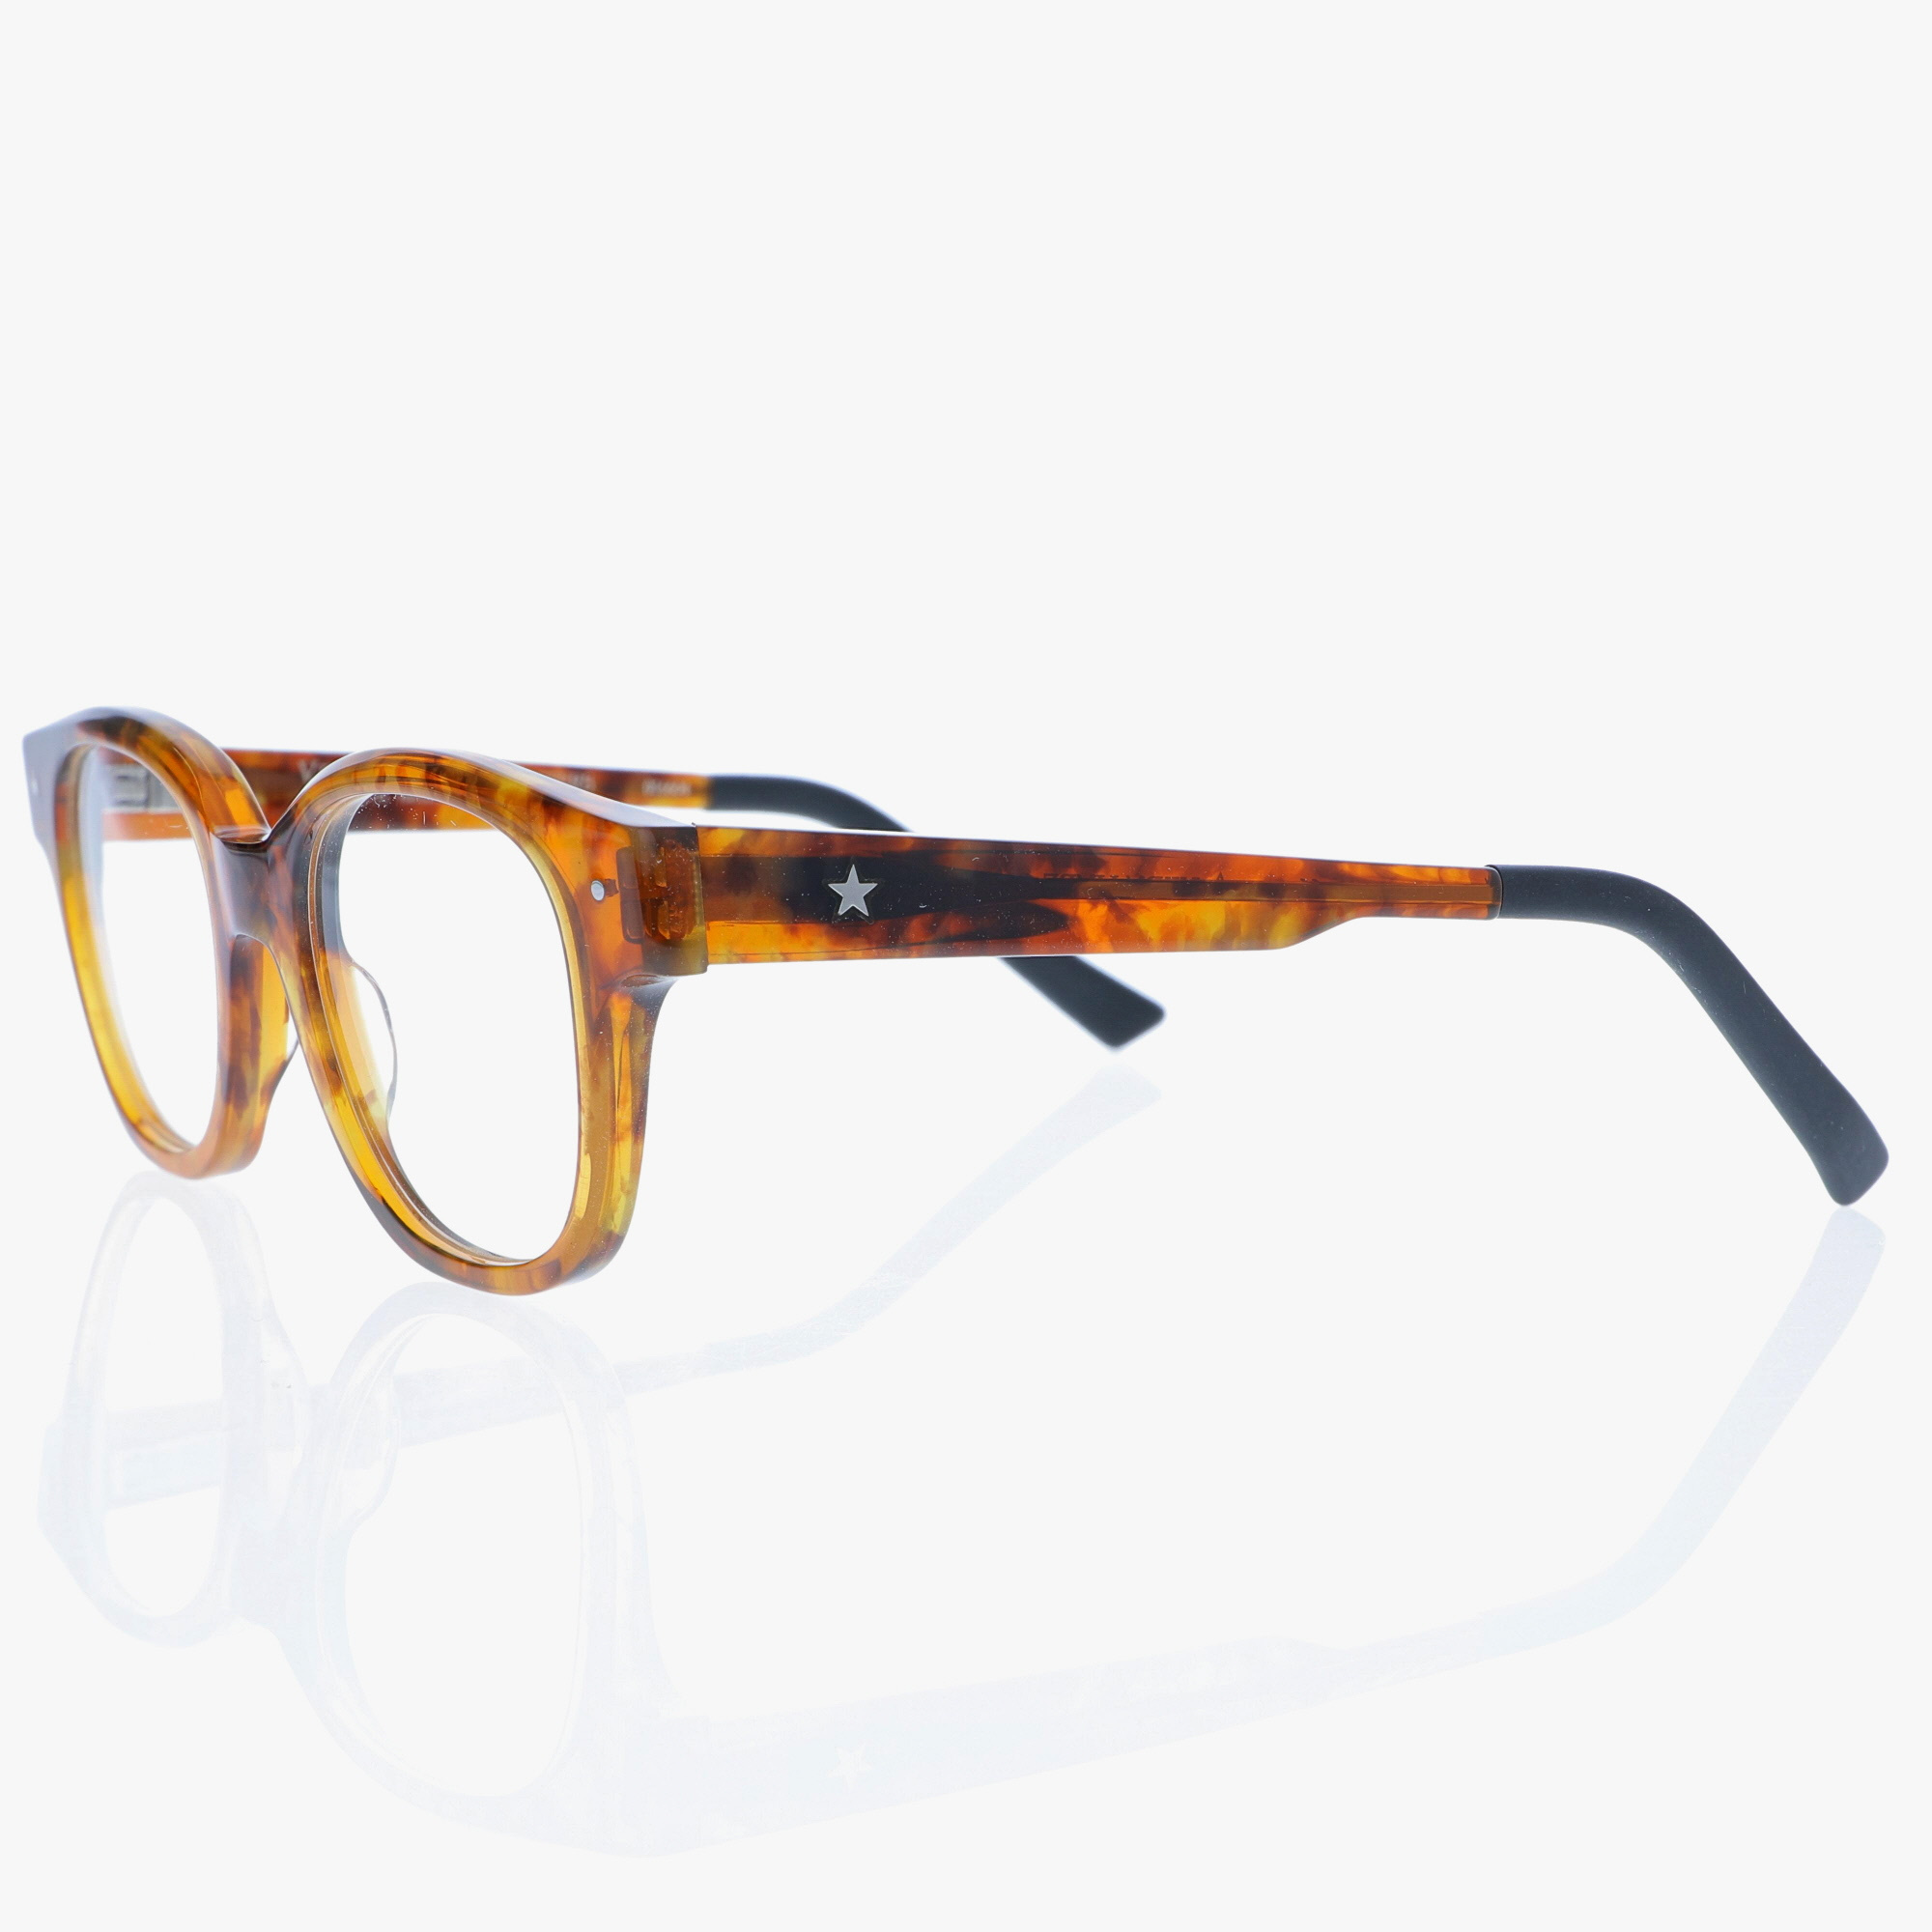 VERY FRENCH GANGSTERS / HYPE / LIGHT TORTOISE SHELL